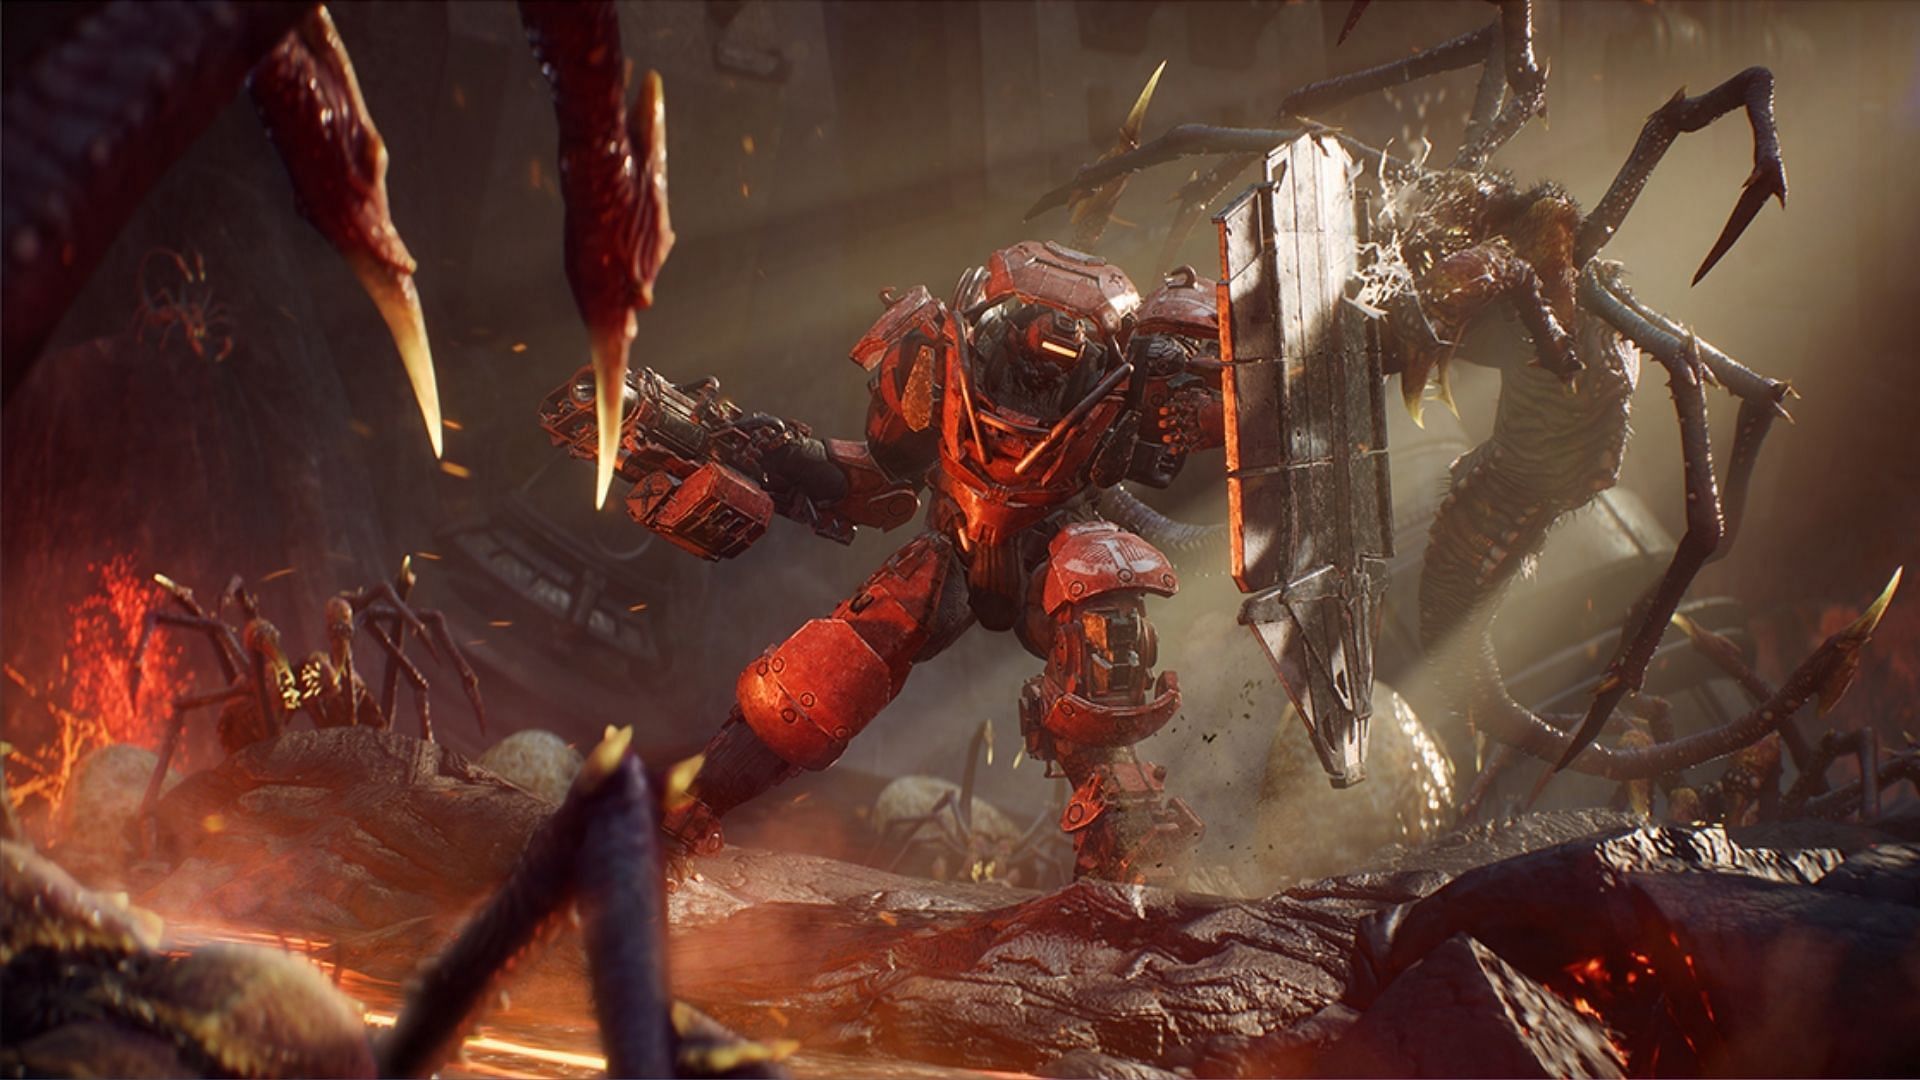 Anthem failed to deliver on a unique open world and technical issues. (Image via Electronic Arts)